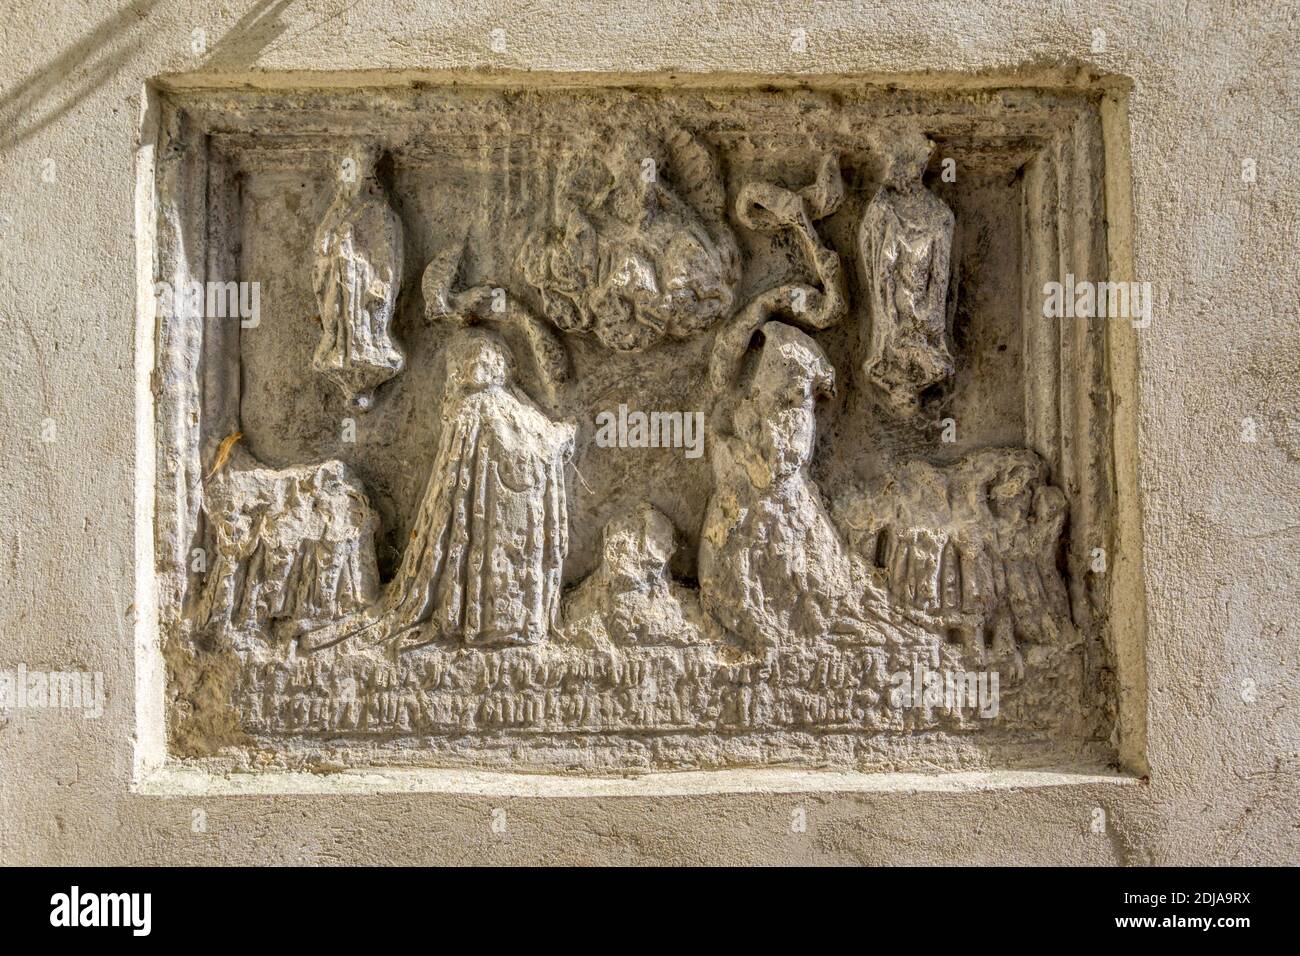 An early 16th century stone carving on the outside wall of the Oxmarket Gallery, Chichester. Originally St Andrew, Oxmarket church. Stock Photo